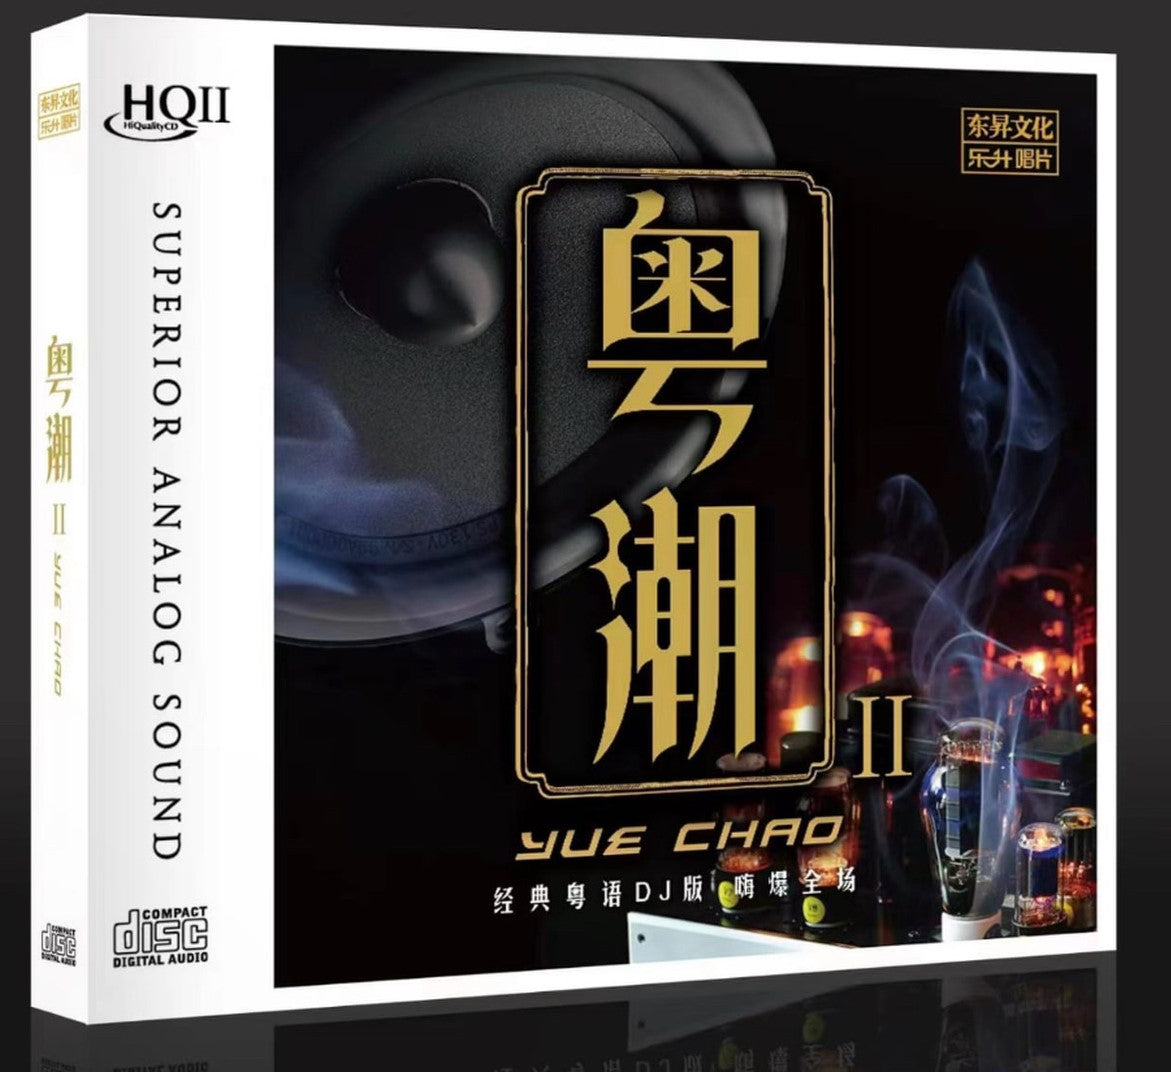 YUE CHAO 粵潮 2- VARIOUS ARTISTS (HQII) CD